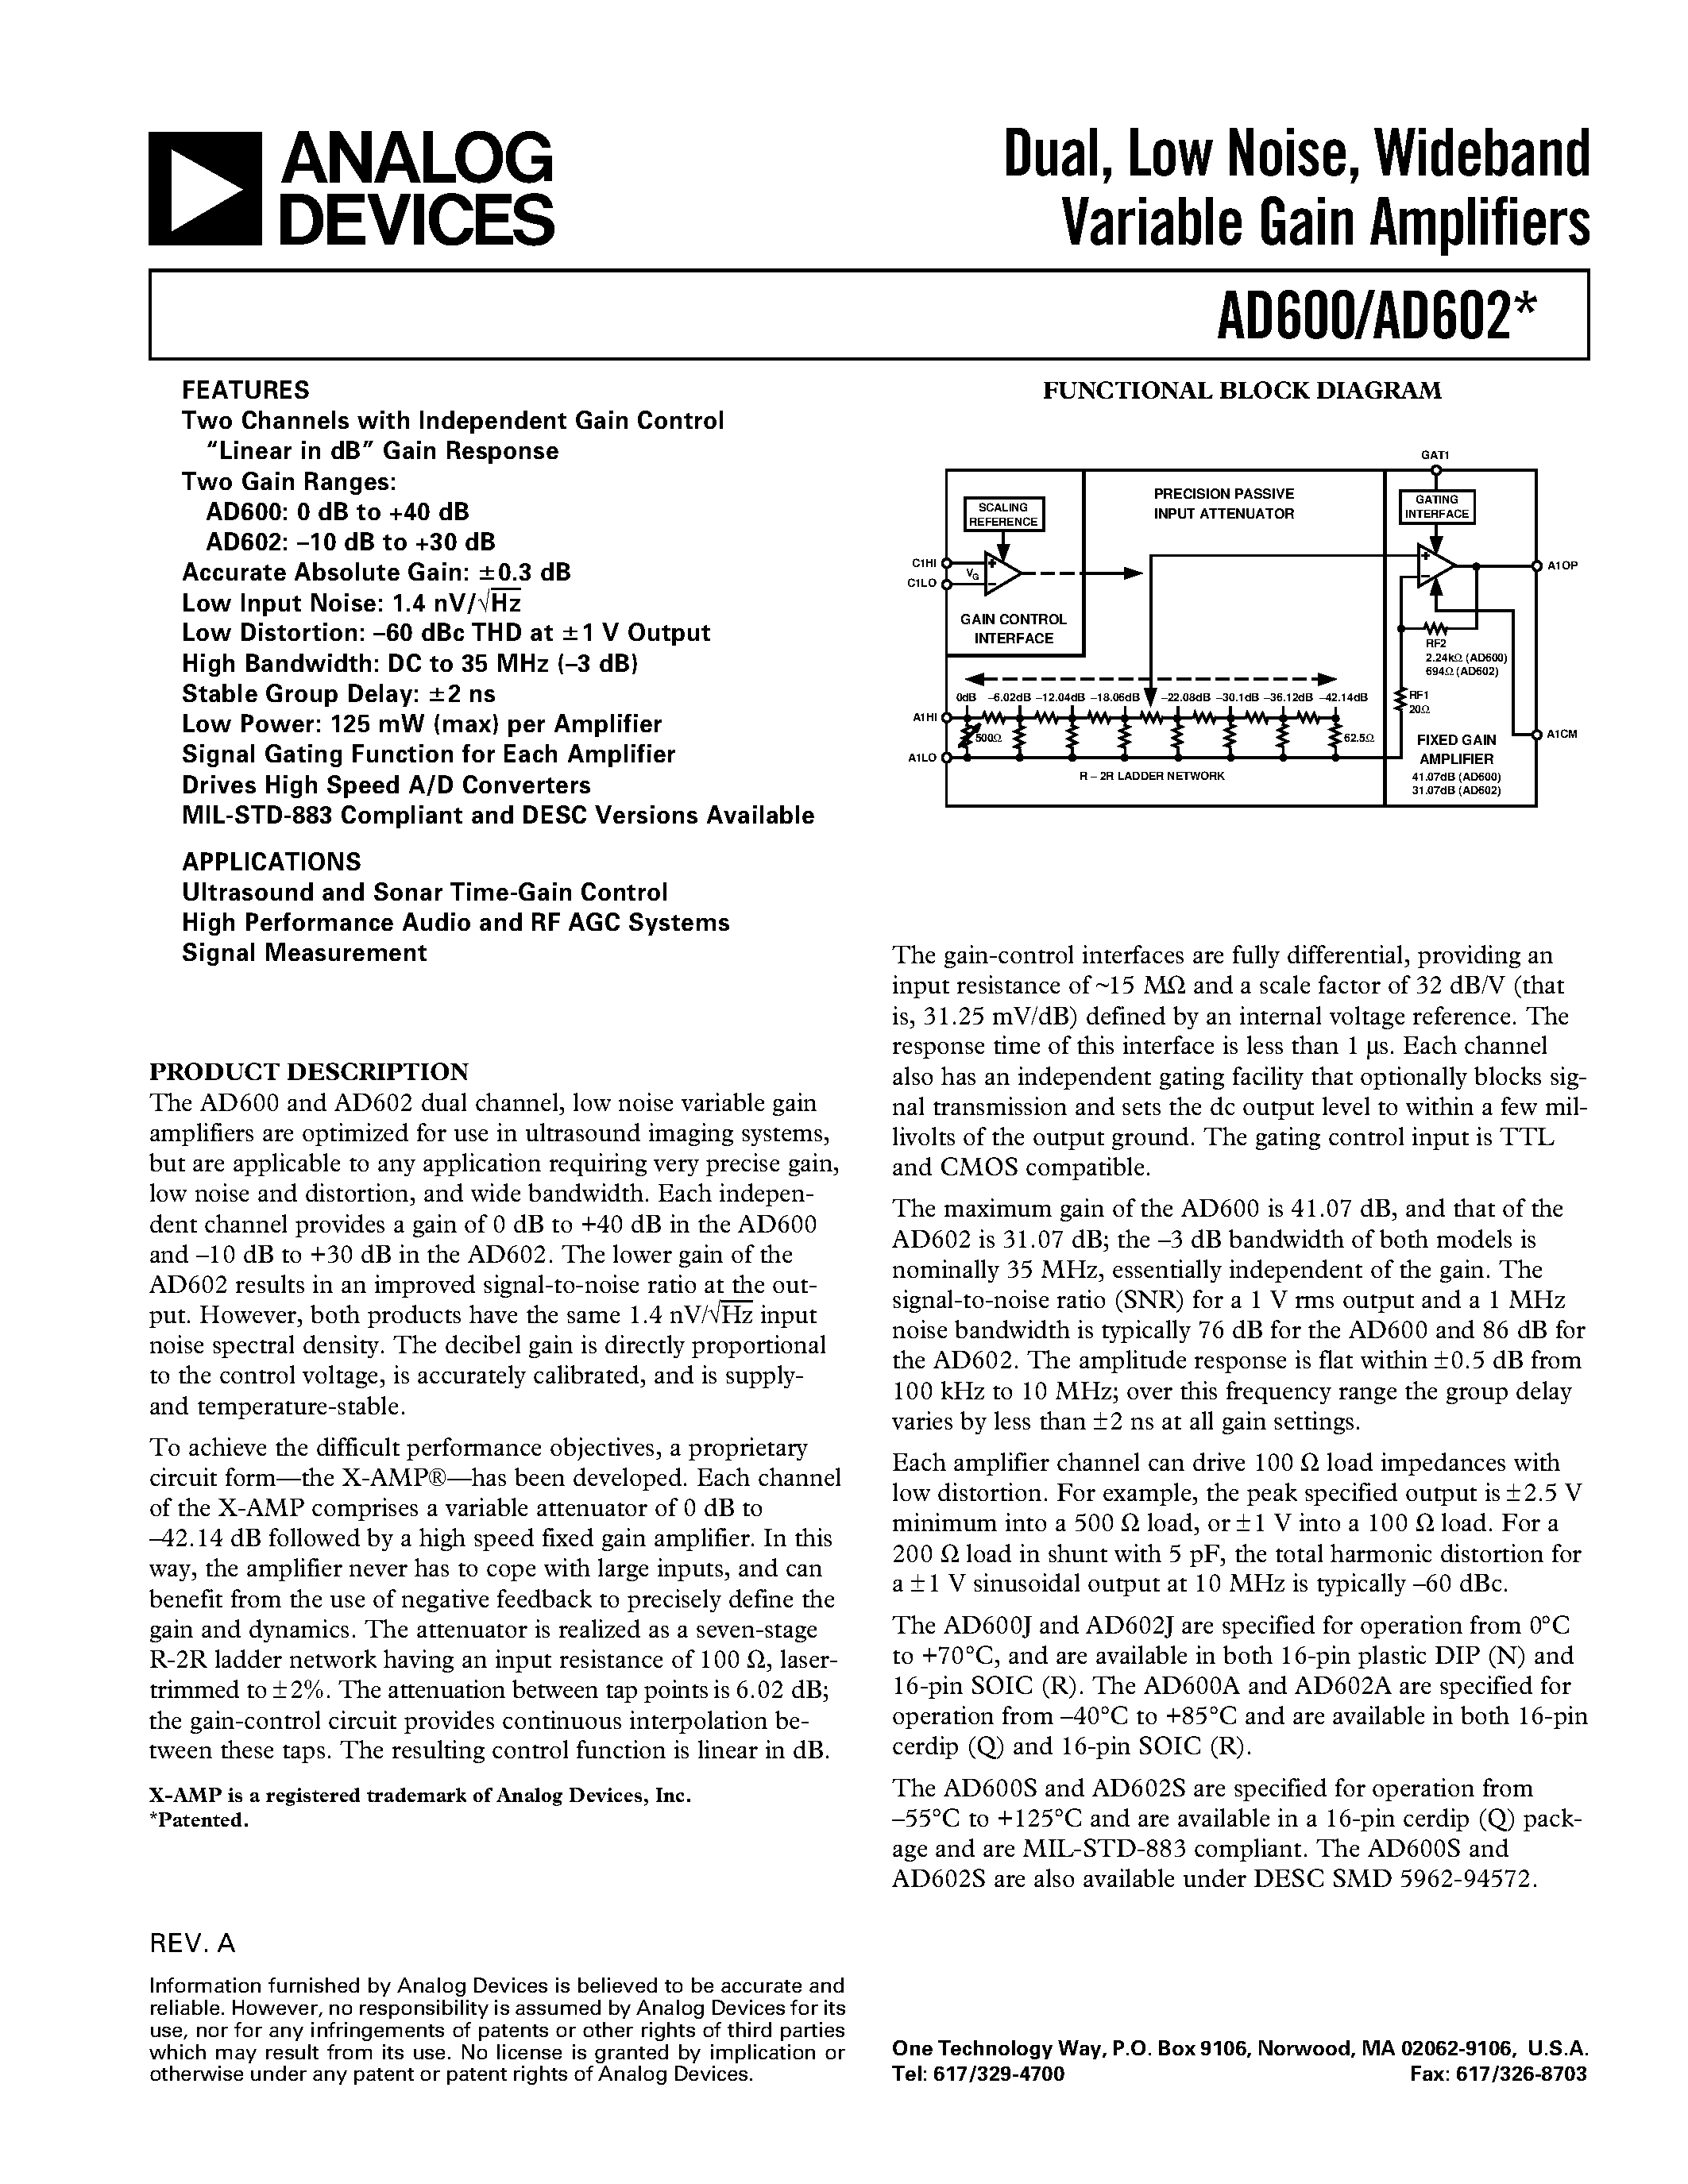 Datasheet AD602JN - Dual/ Low Noise/ Wideband Variable Gain Amplifiers page 1